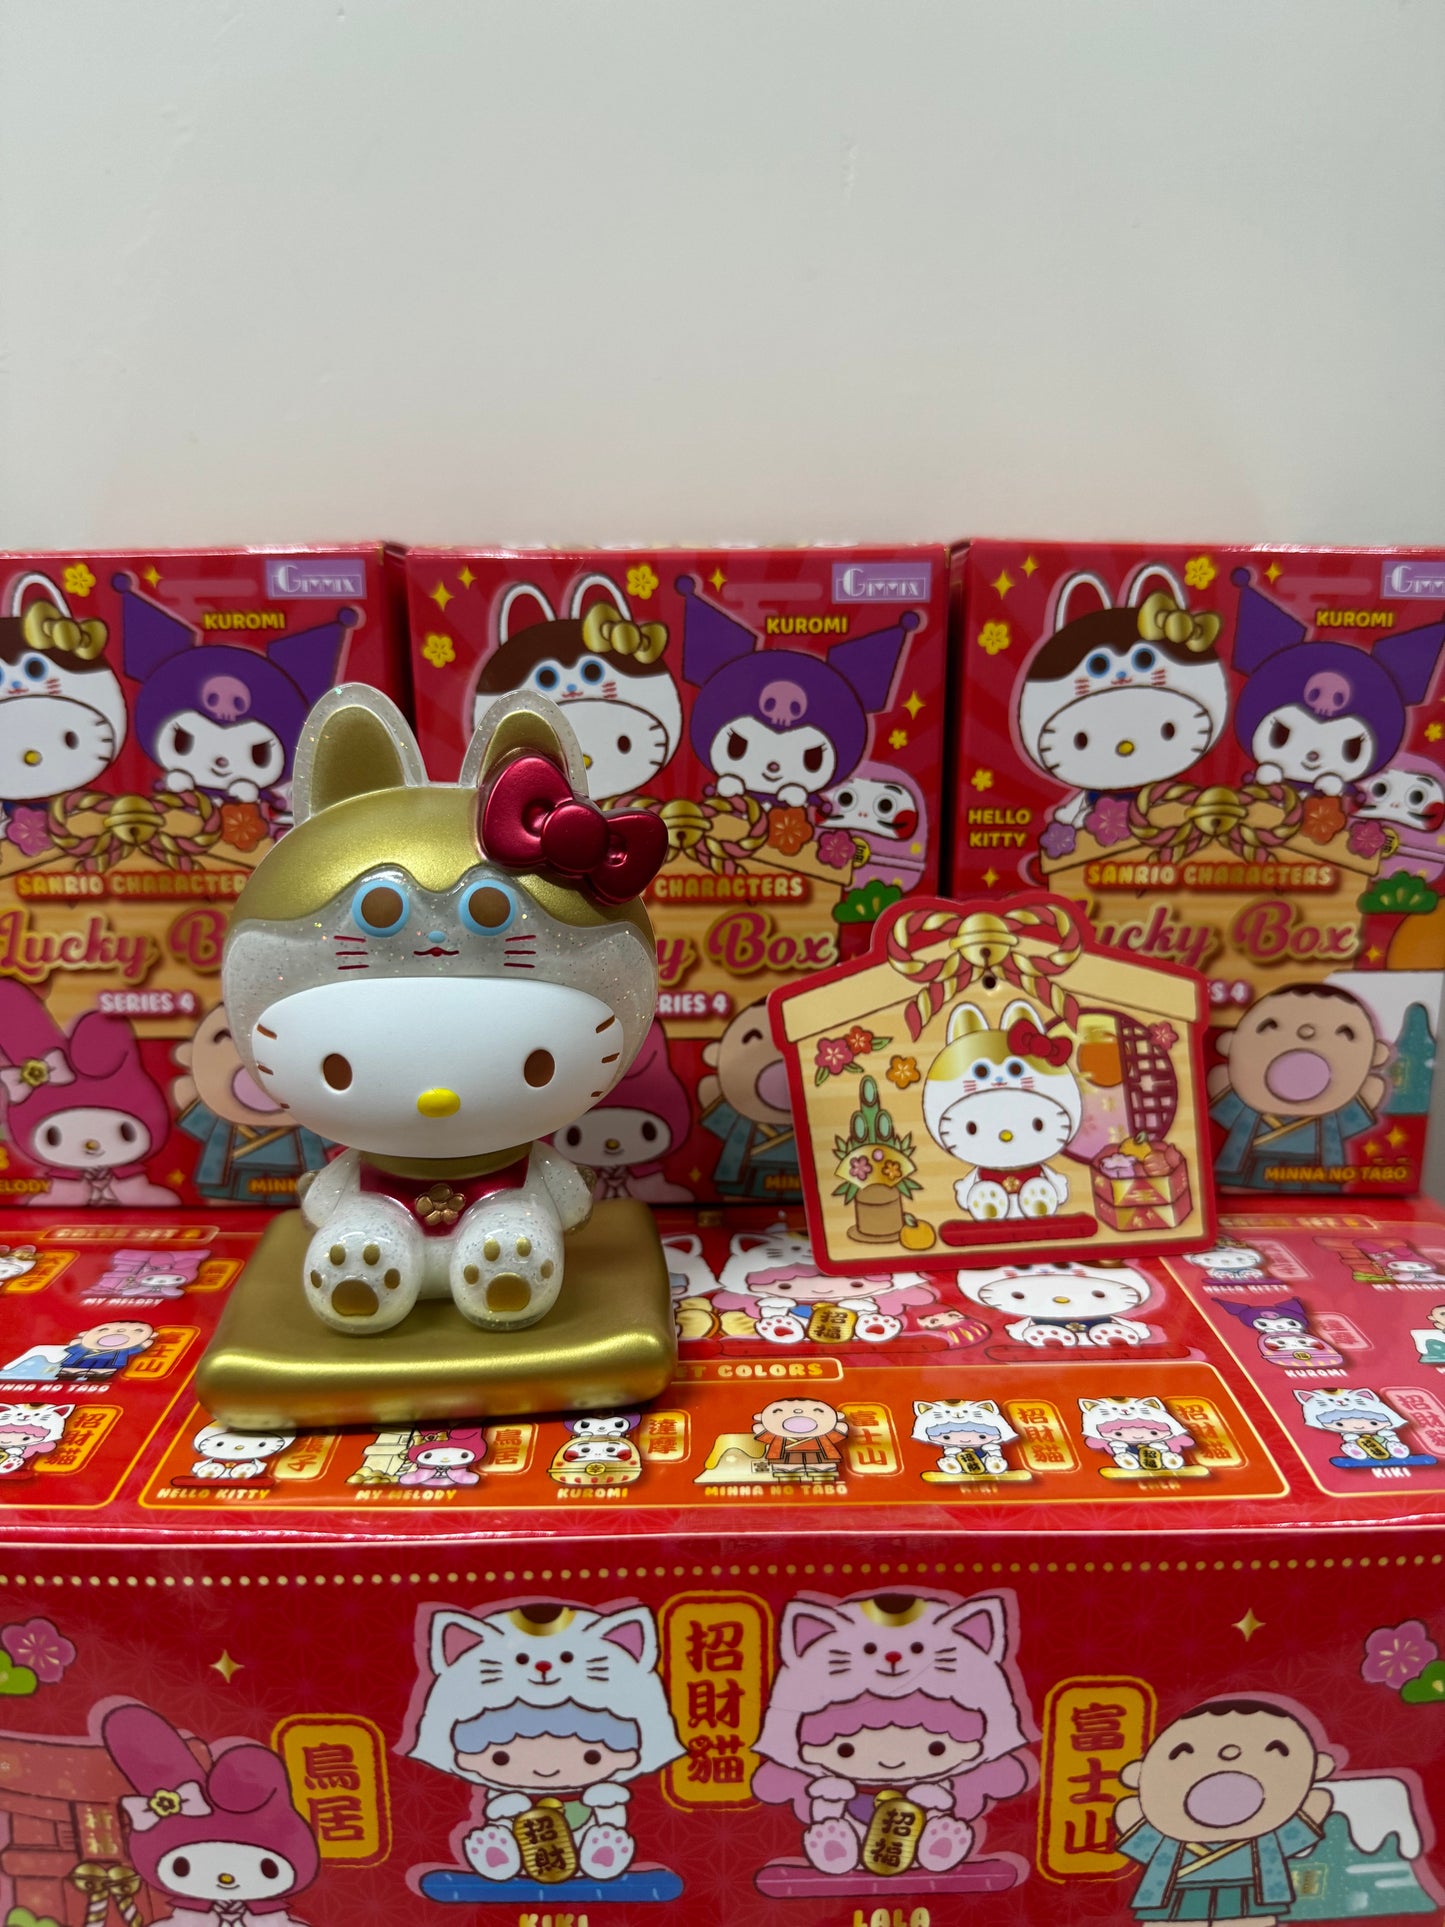 Sanrio Characters Vinly Figure Lucky Box | Series A+B+Secret full set of 3 Hello Kitty Inukoro - Kawaii Collectable Toys Mystery Blind Box